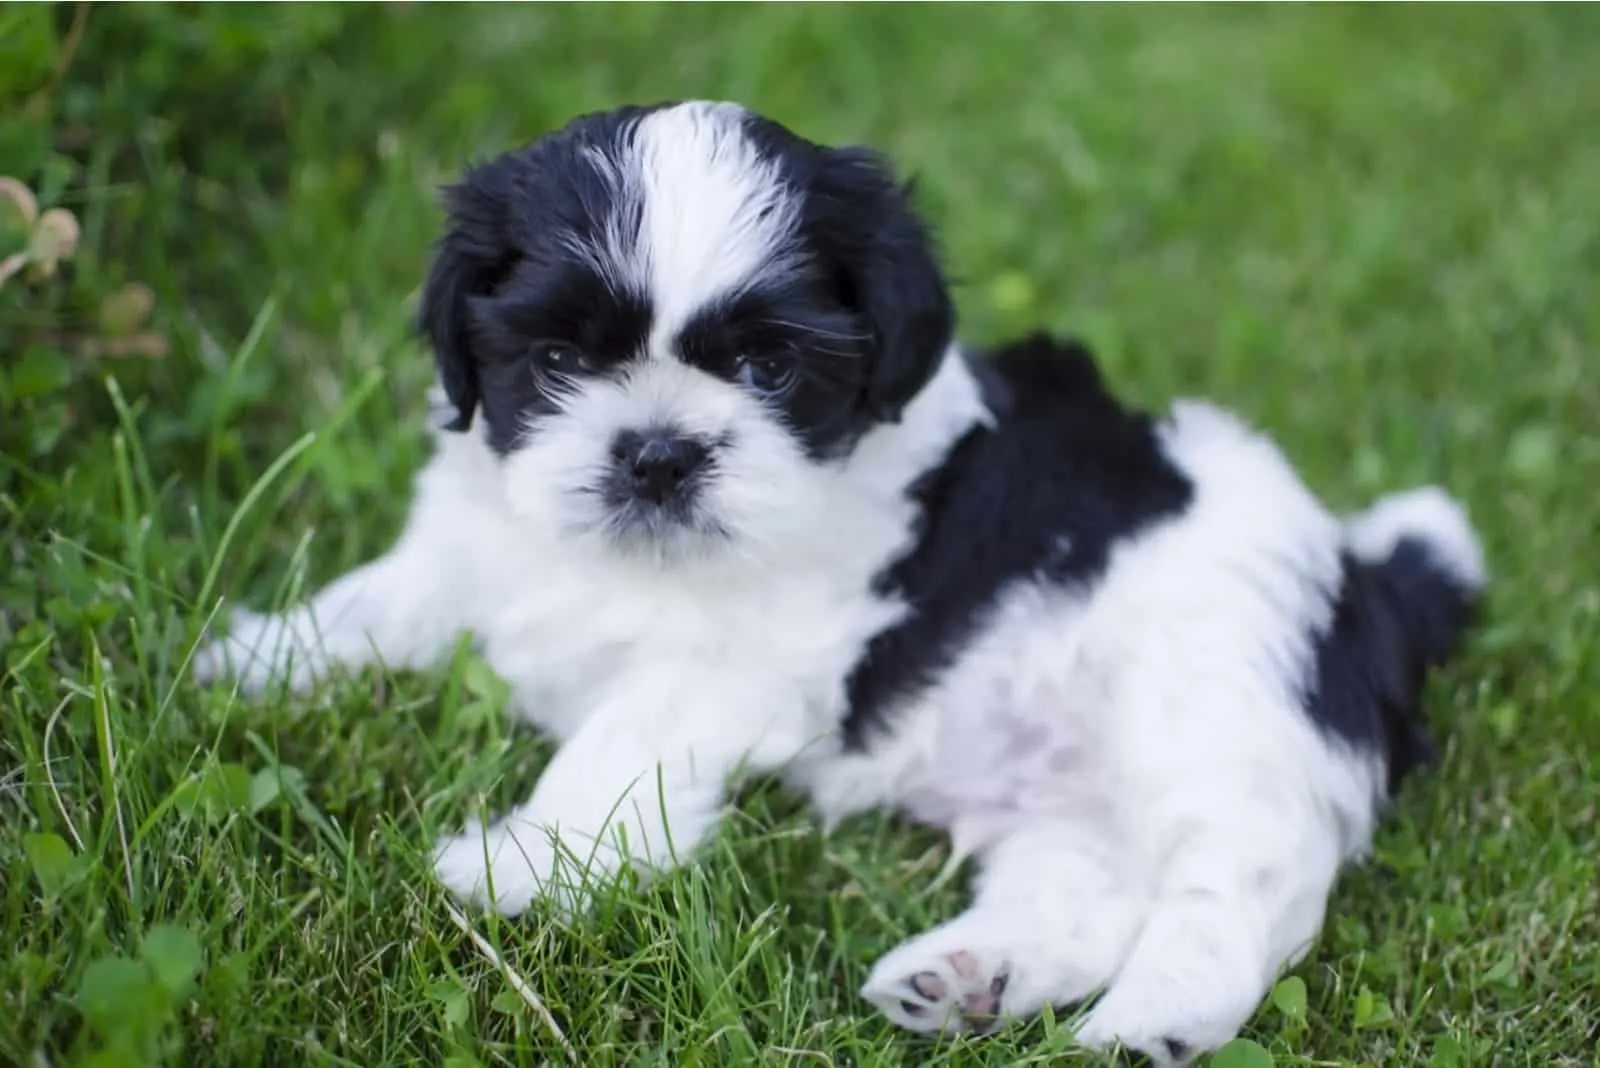 Black and white shih tzu puppy playing on the green grass